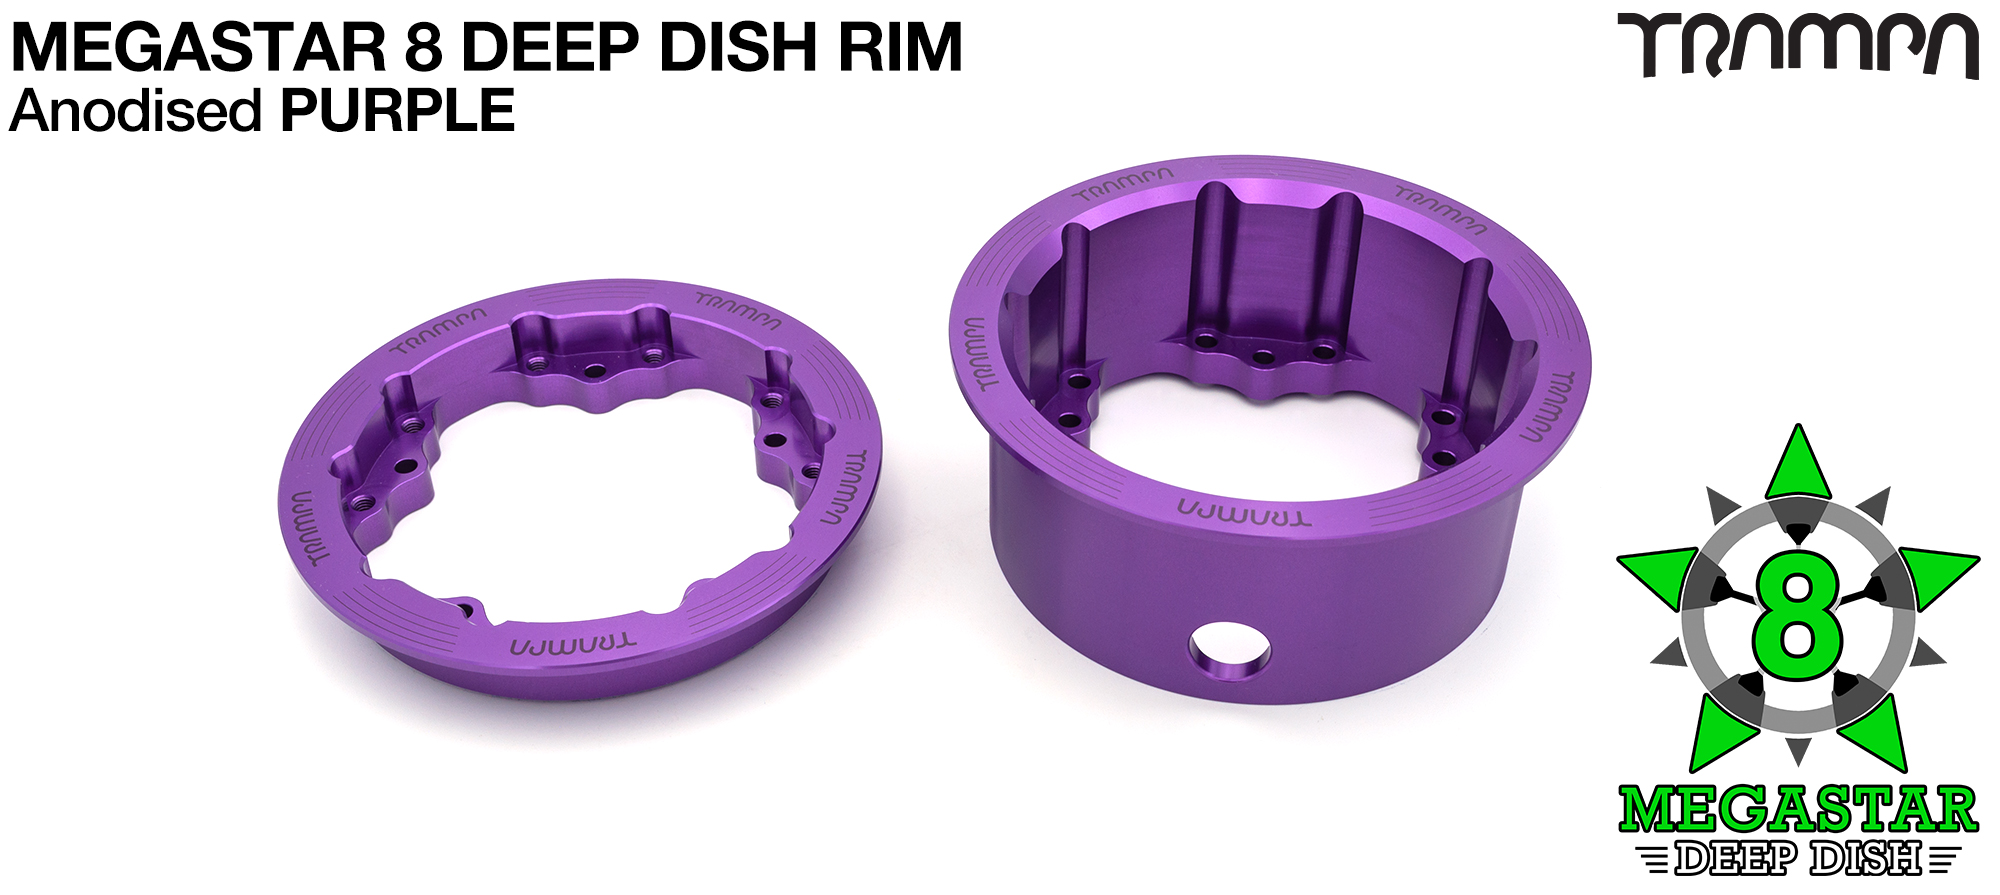 MEGASTAR 8 DEEP-DISH Rims Measure 3.75 x 2.5 Inch. The bearings are positioned OFF-SET widening the wheel base & accept all 3.75 Rim Tyres - PURPLE 